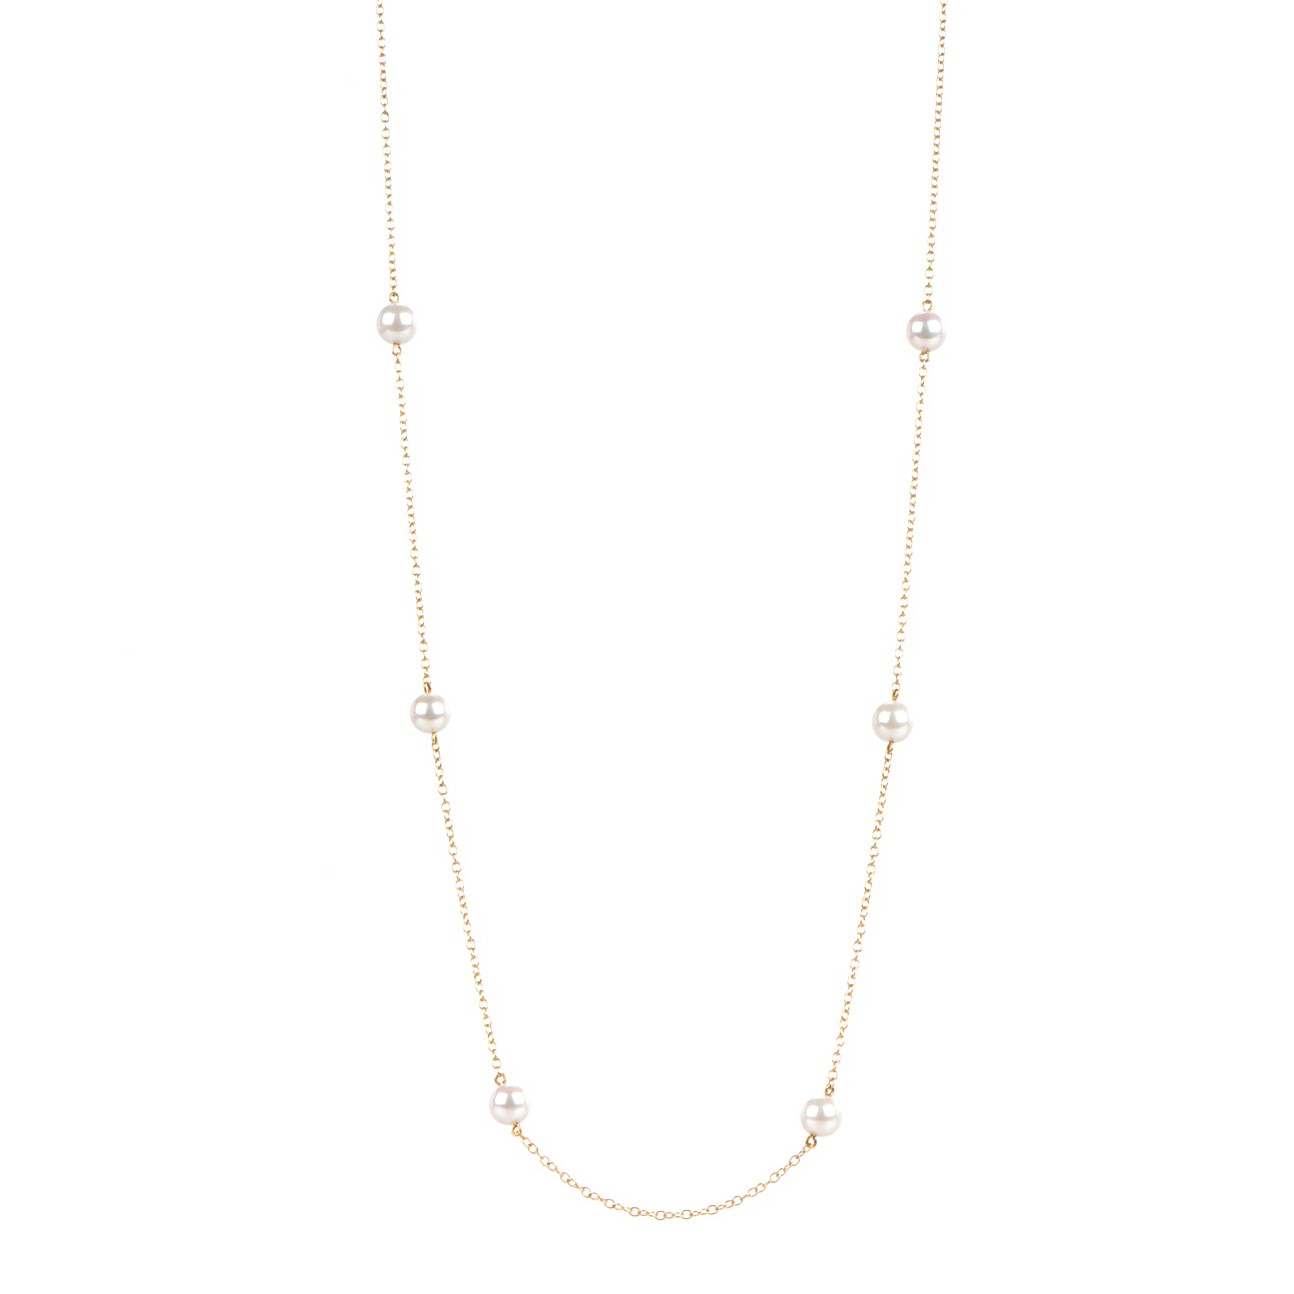 TIFFANY 18K Yellow Gold 7mm Elsa Peretti Pearls By The Yard Necklace ...